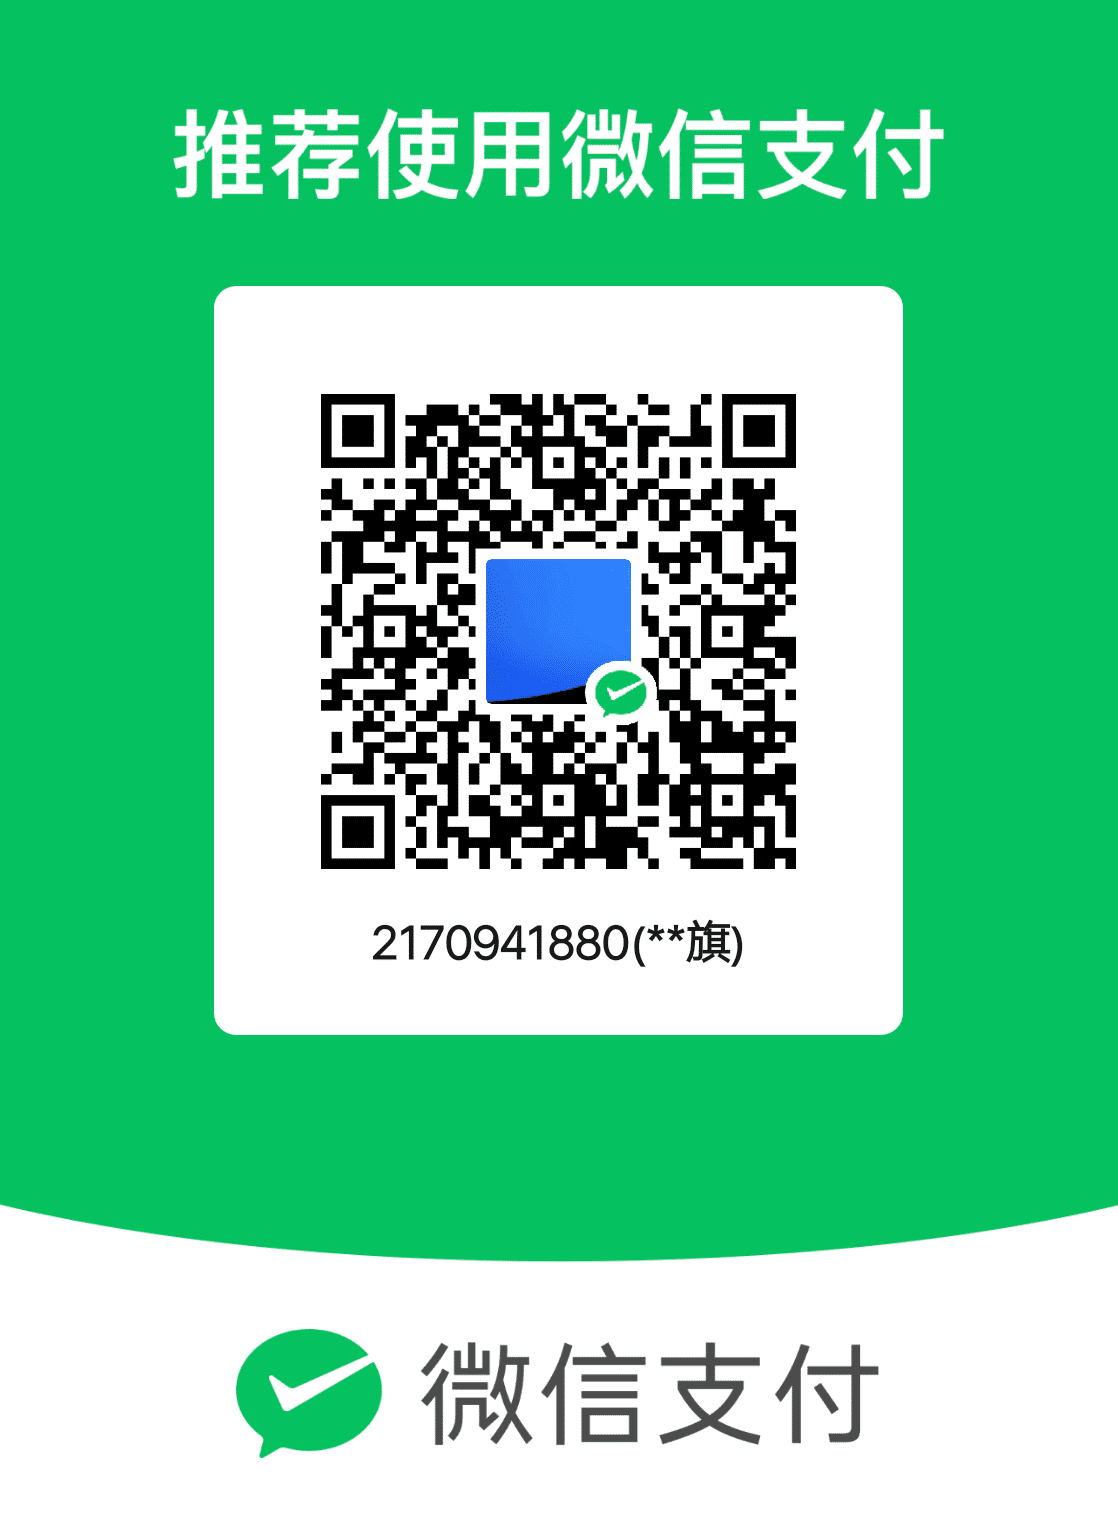 mm_facetoface_collect_qrcode_1660872833720.png